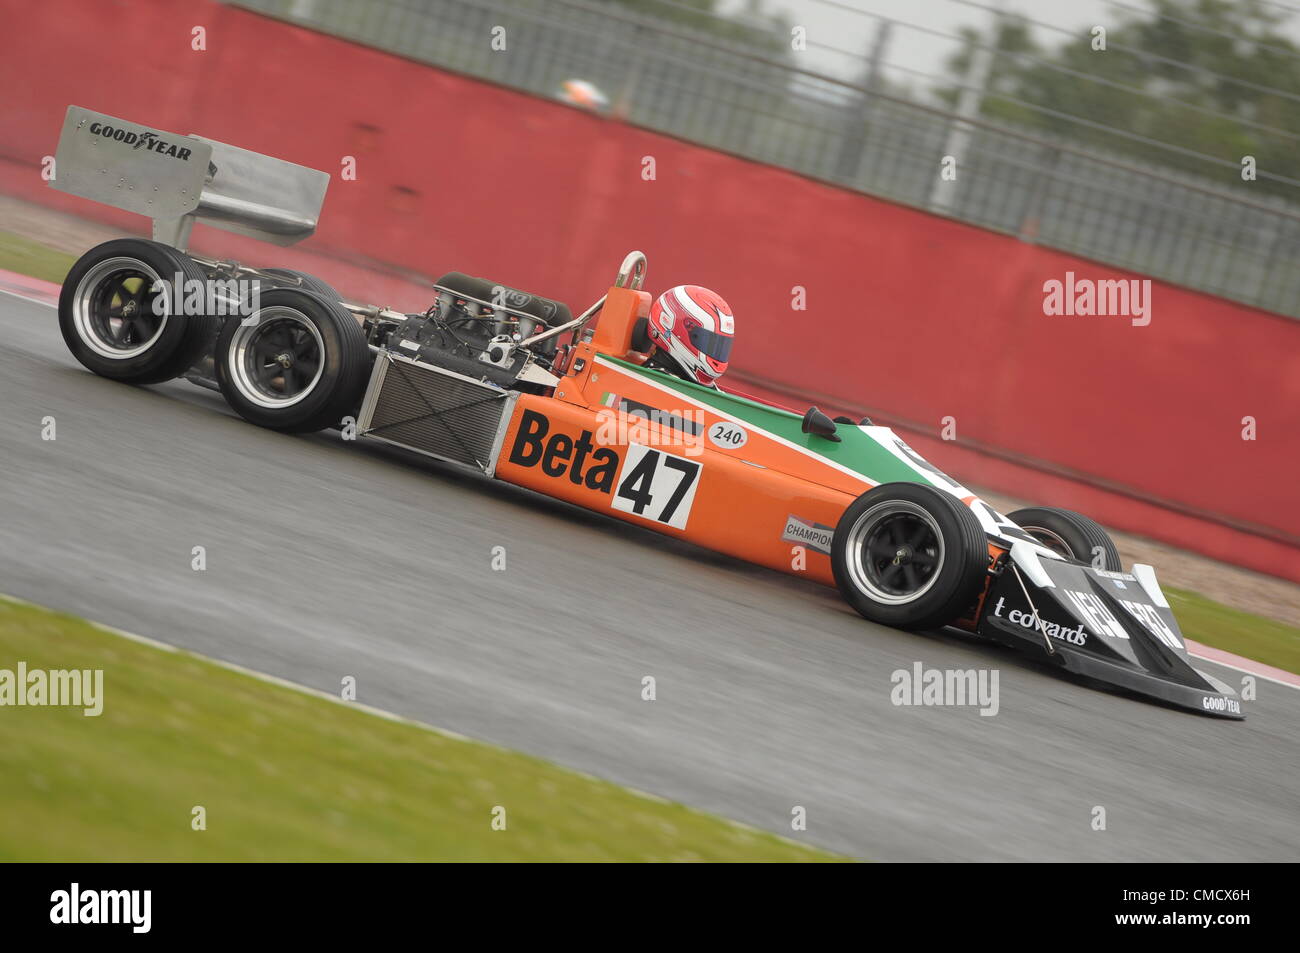 20th July 2012, Silverstone, UK Jeremy Smith's March 2-4-0 in the wet during qualifying for the Daily Express International Trophy for Grand Prix Masters race at Silverstone Classic 2012 Stock Photo